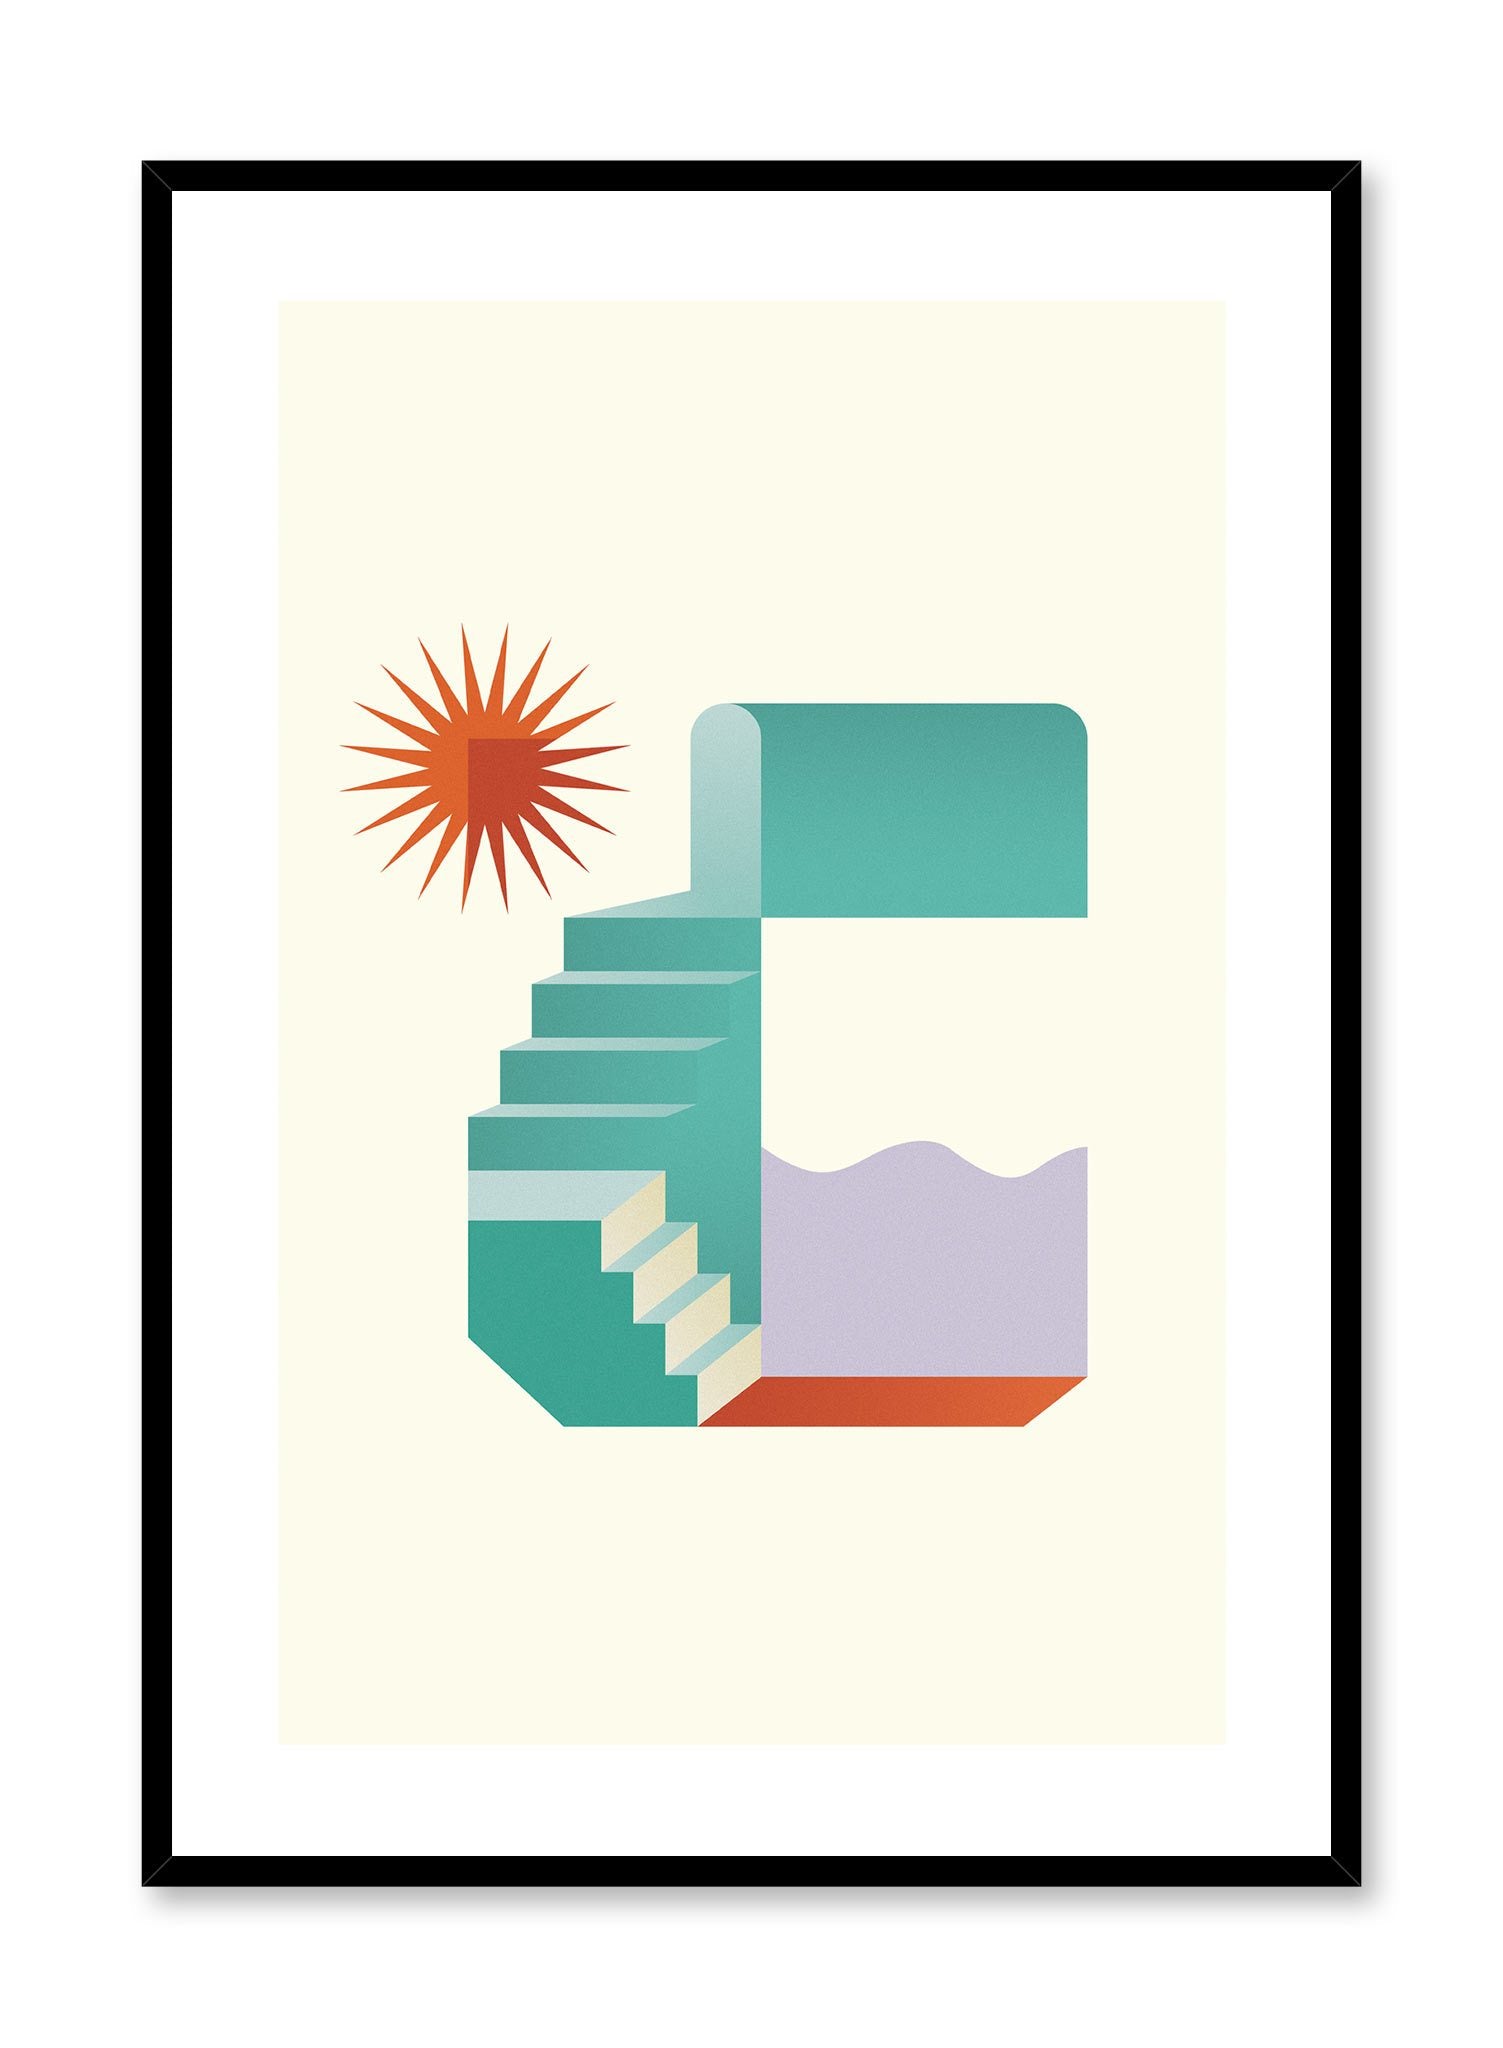 Sunny Step is a minimalist illustration poster of a geometric staircase by Opposite Wall.